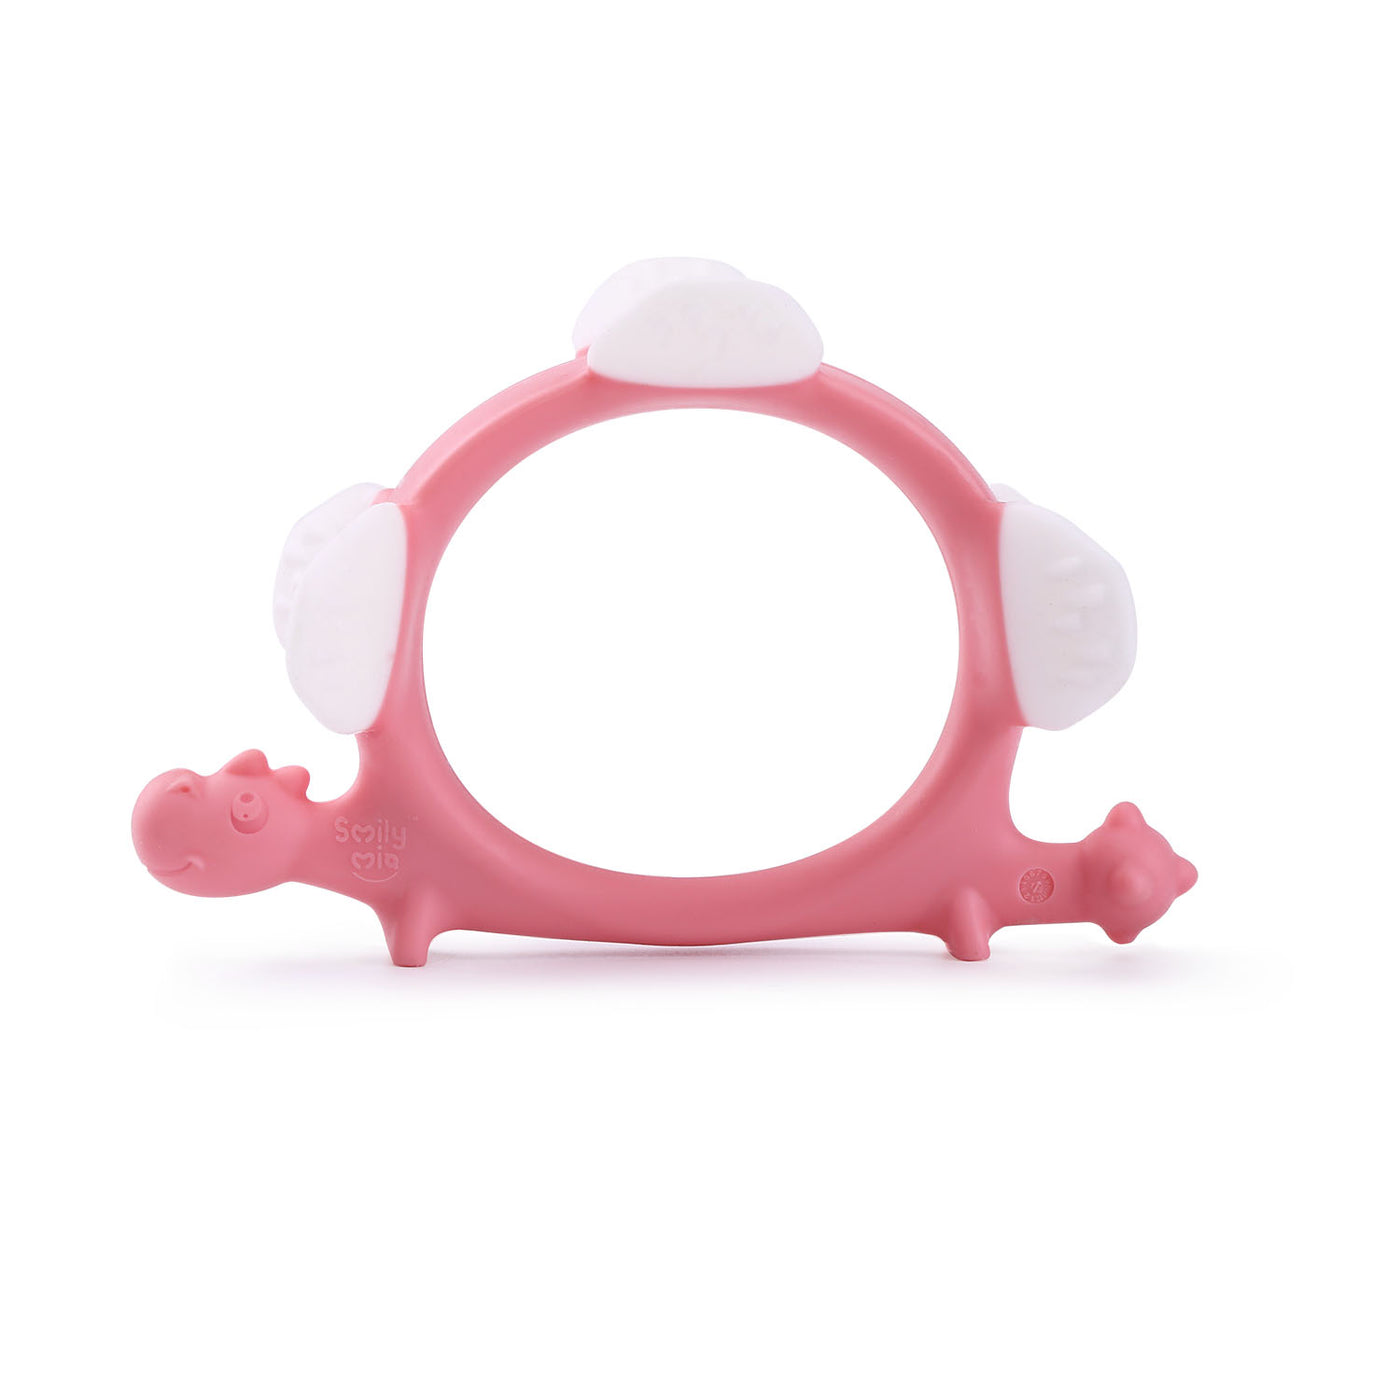 Smily Mia Norman The Dinosaur Soft & Durable Silicone Teether Toy for 3M+ Babies.